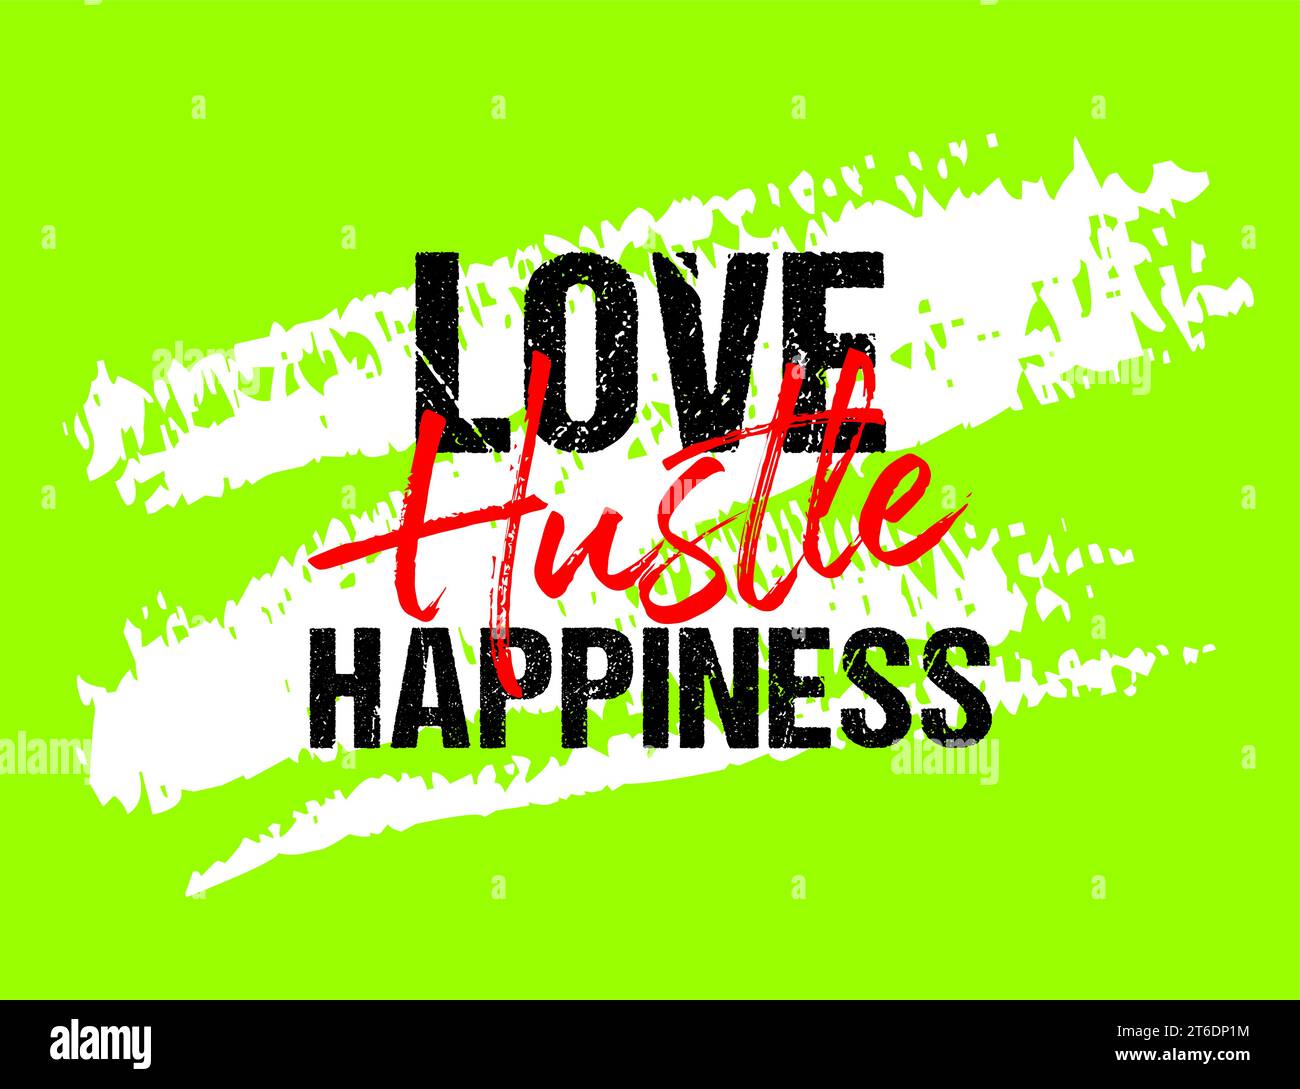 Love hustle happiness motivational quote grunge lettering, slogan design, typography, brush strokes background Stock Vector